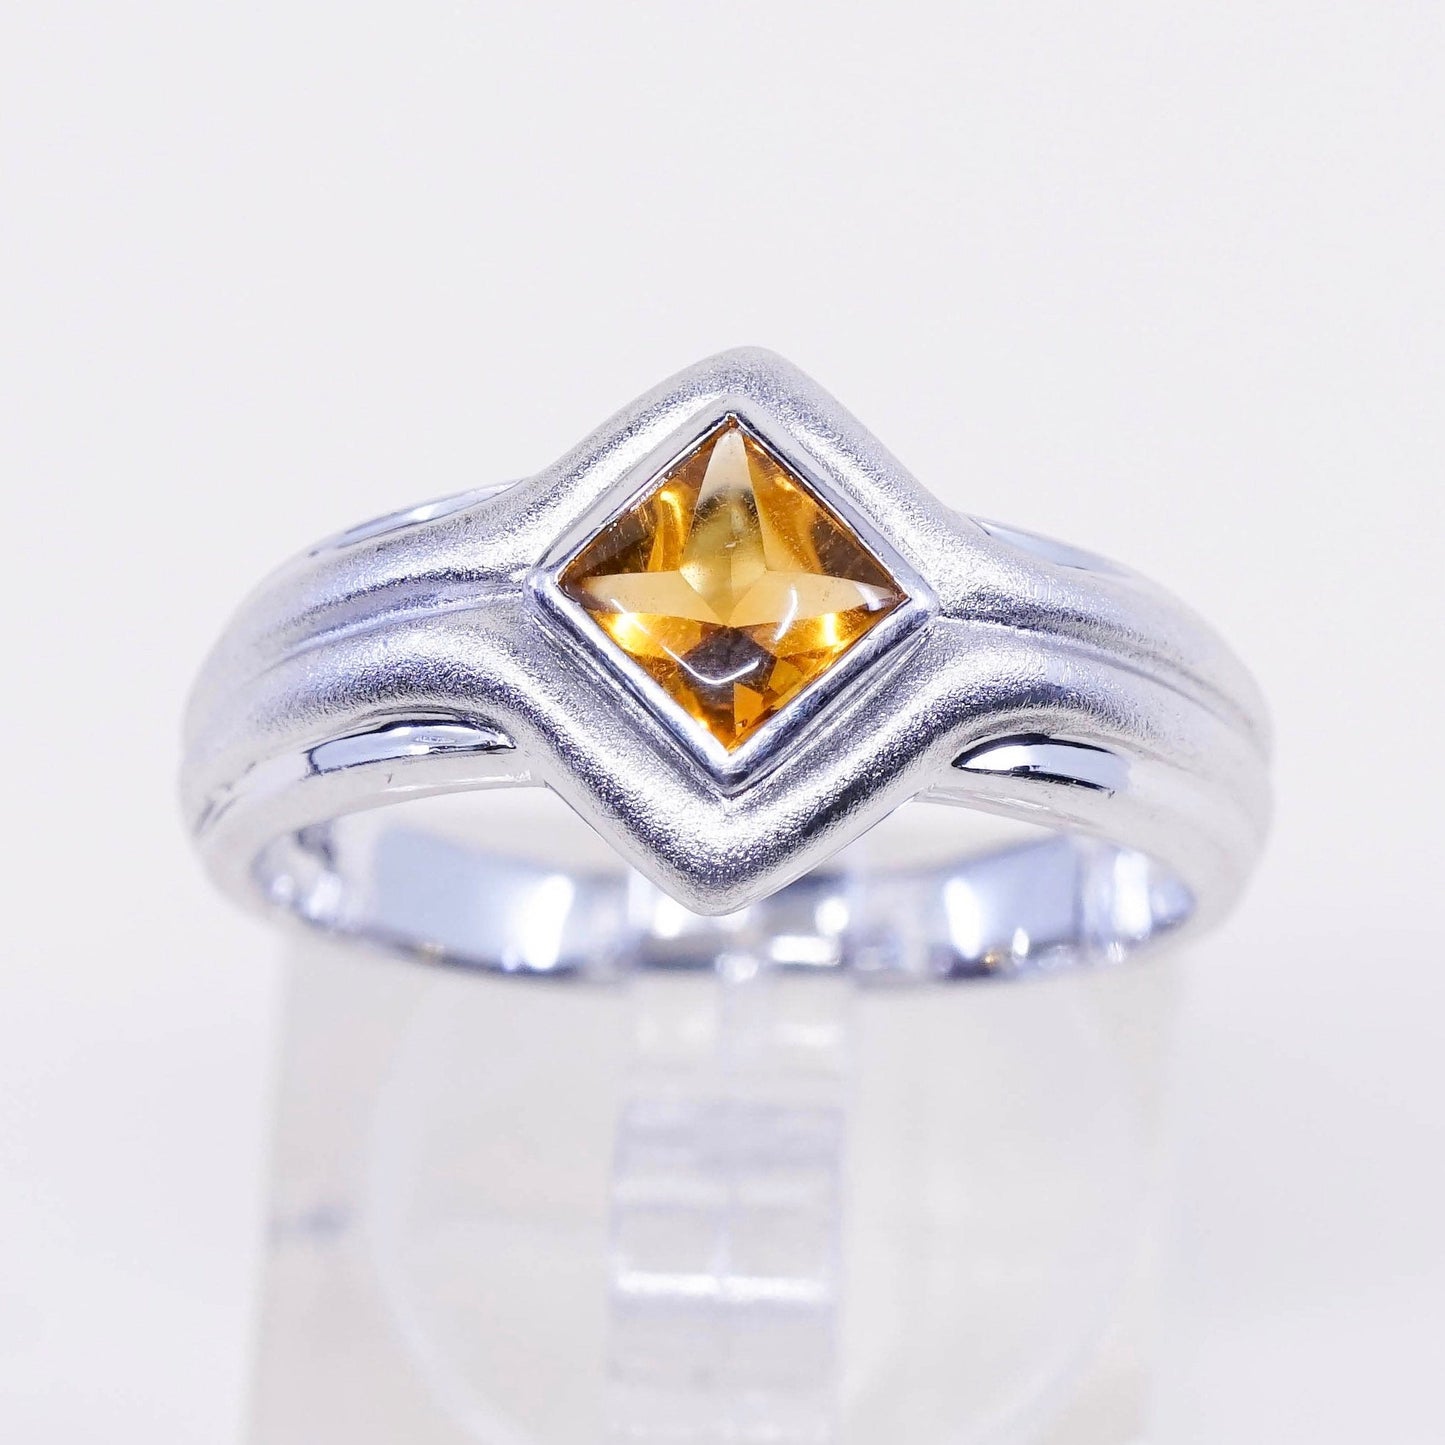 sz 9, vintage Sterling silver handmade ring, ribbed 925 band with citrine